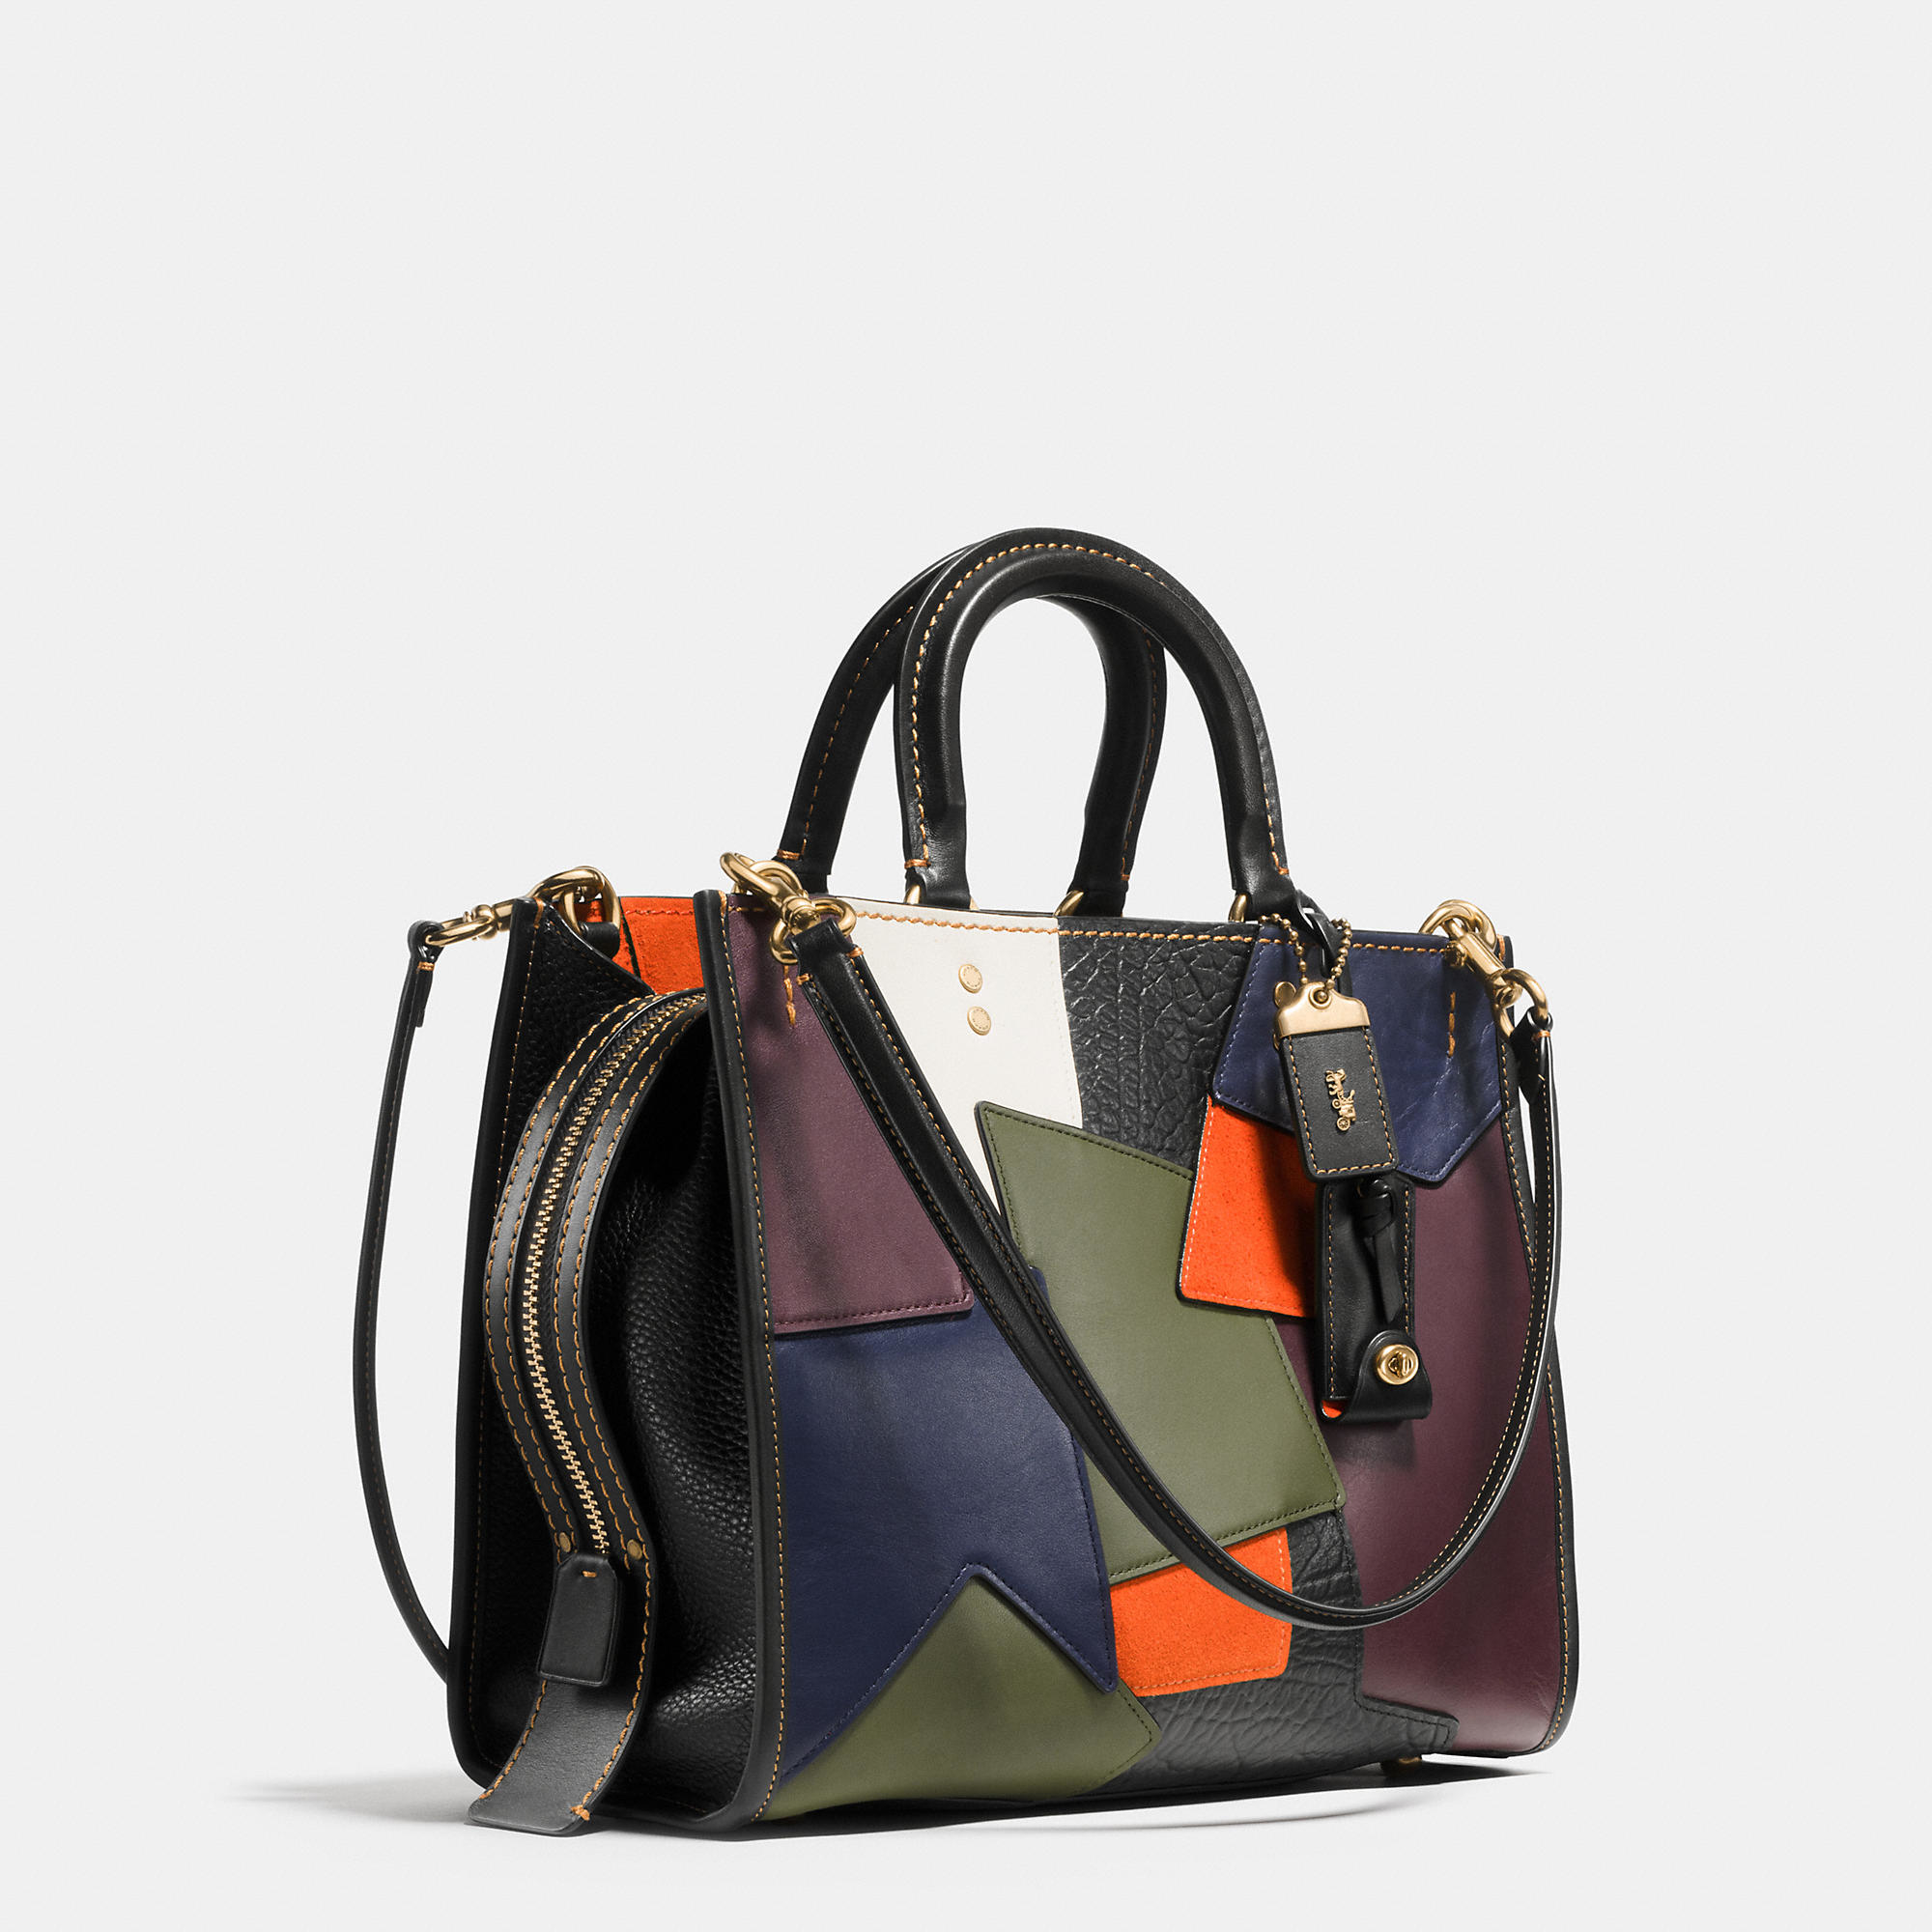 Coach Rogue Bag In Patchwork Leather in Multicolor (OLD BRASS/BLACK MULTI) | Lyst